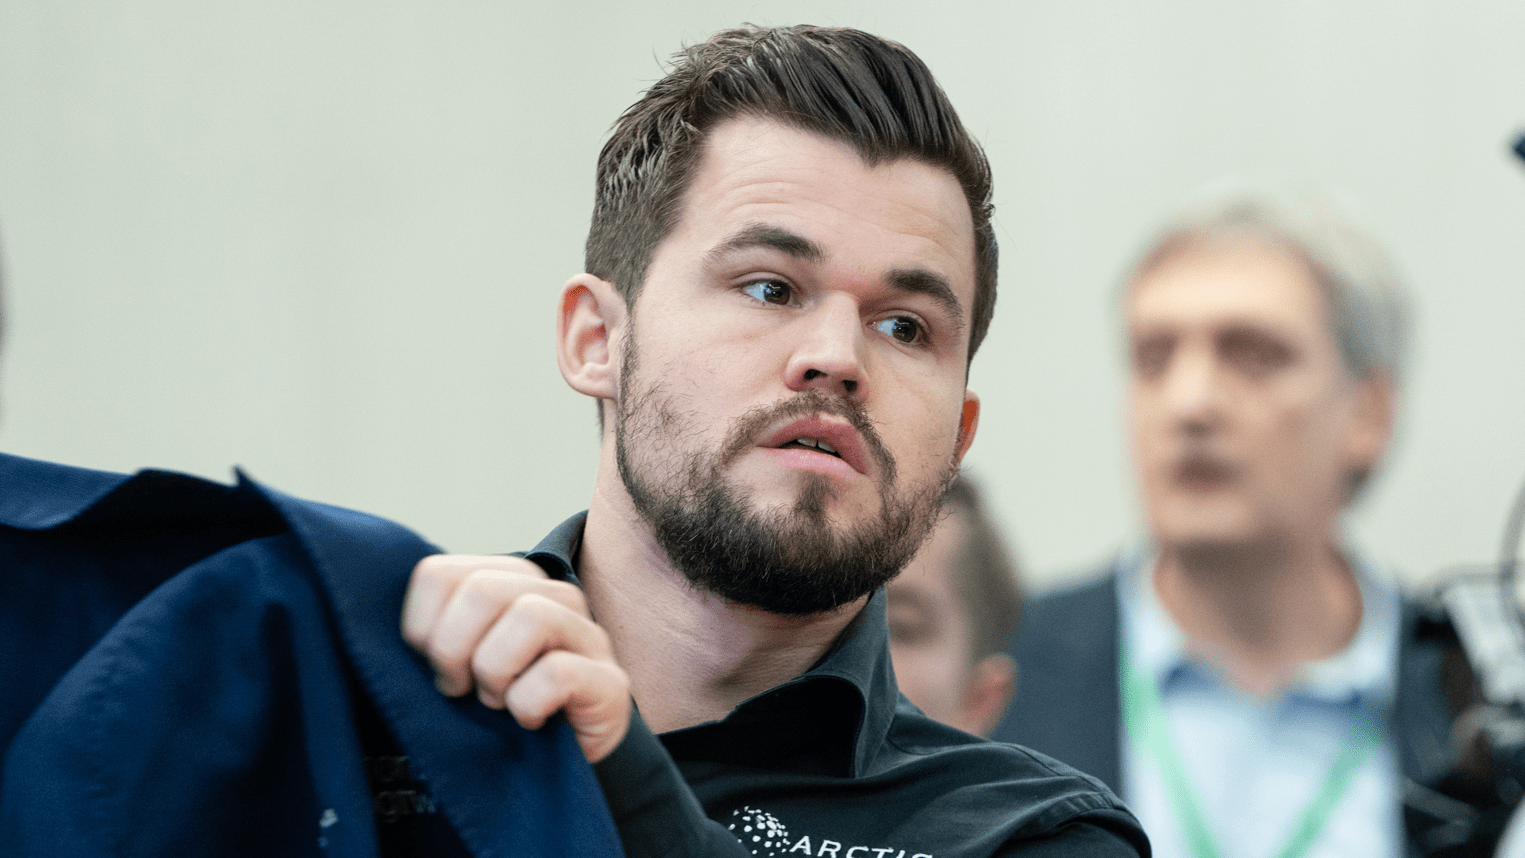 Russian Teams Win At European Club Cup As Carlsen Plays Last OTB Games Before Match